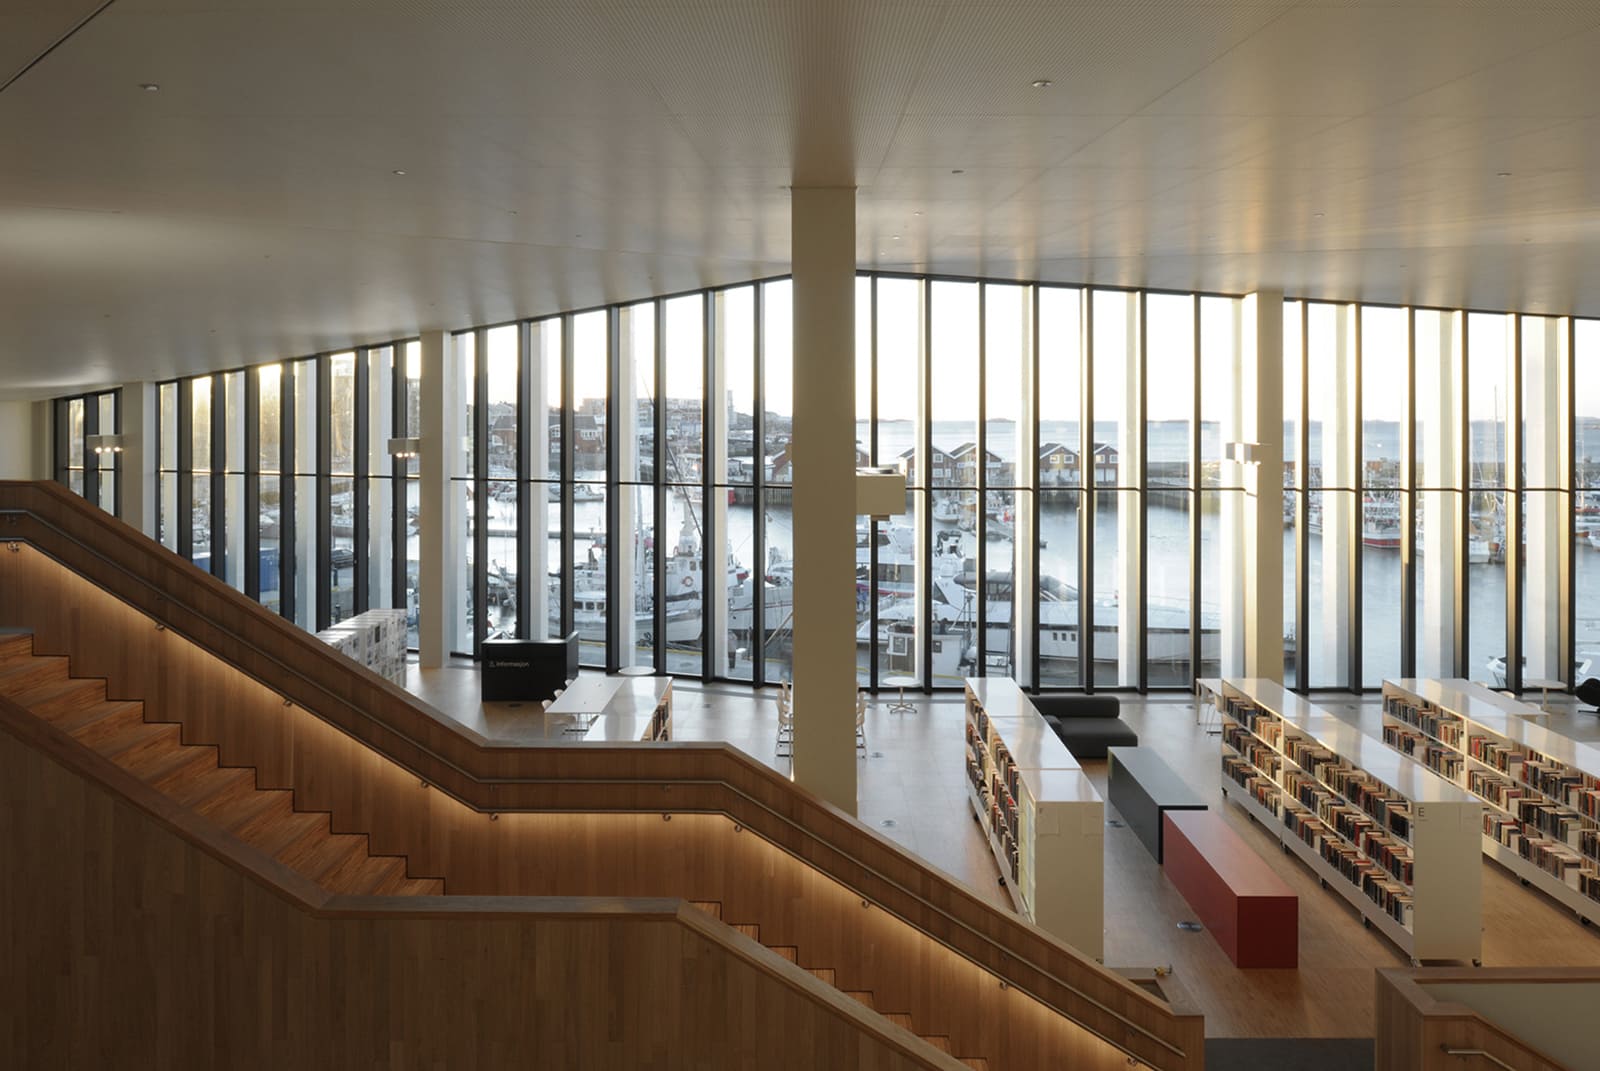 Stormen – Library and Concert Hall in Bodø